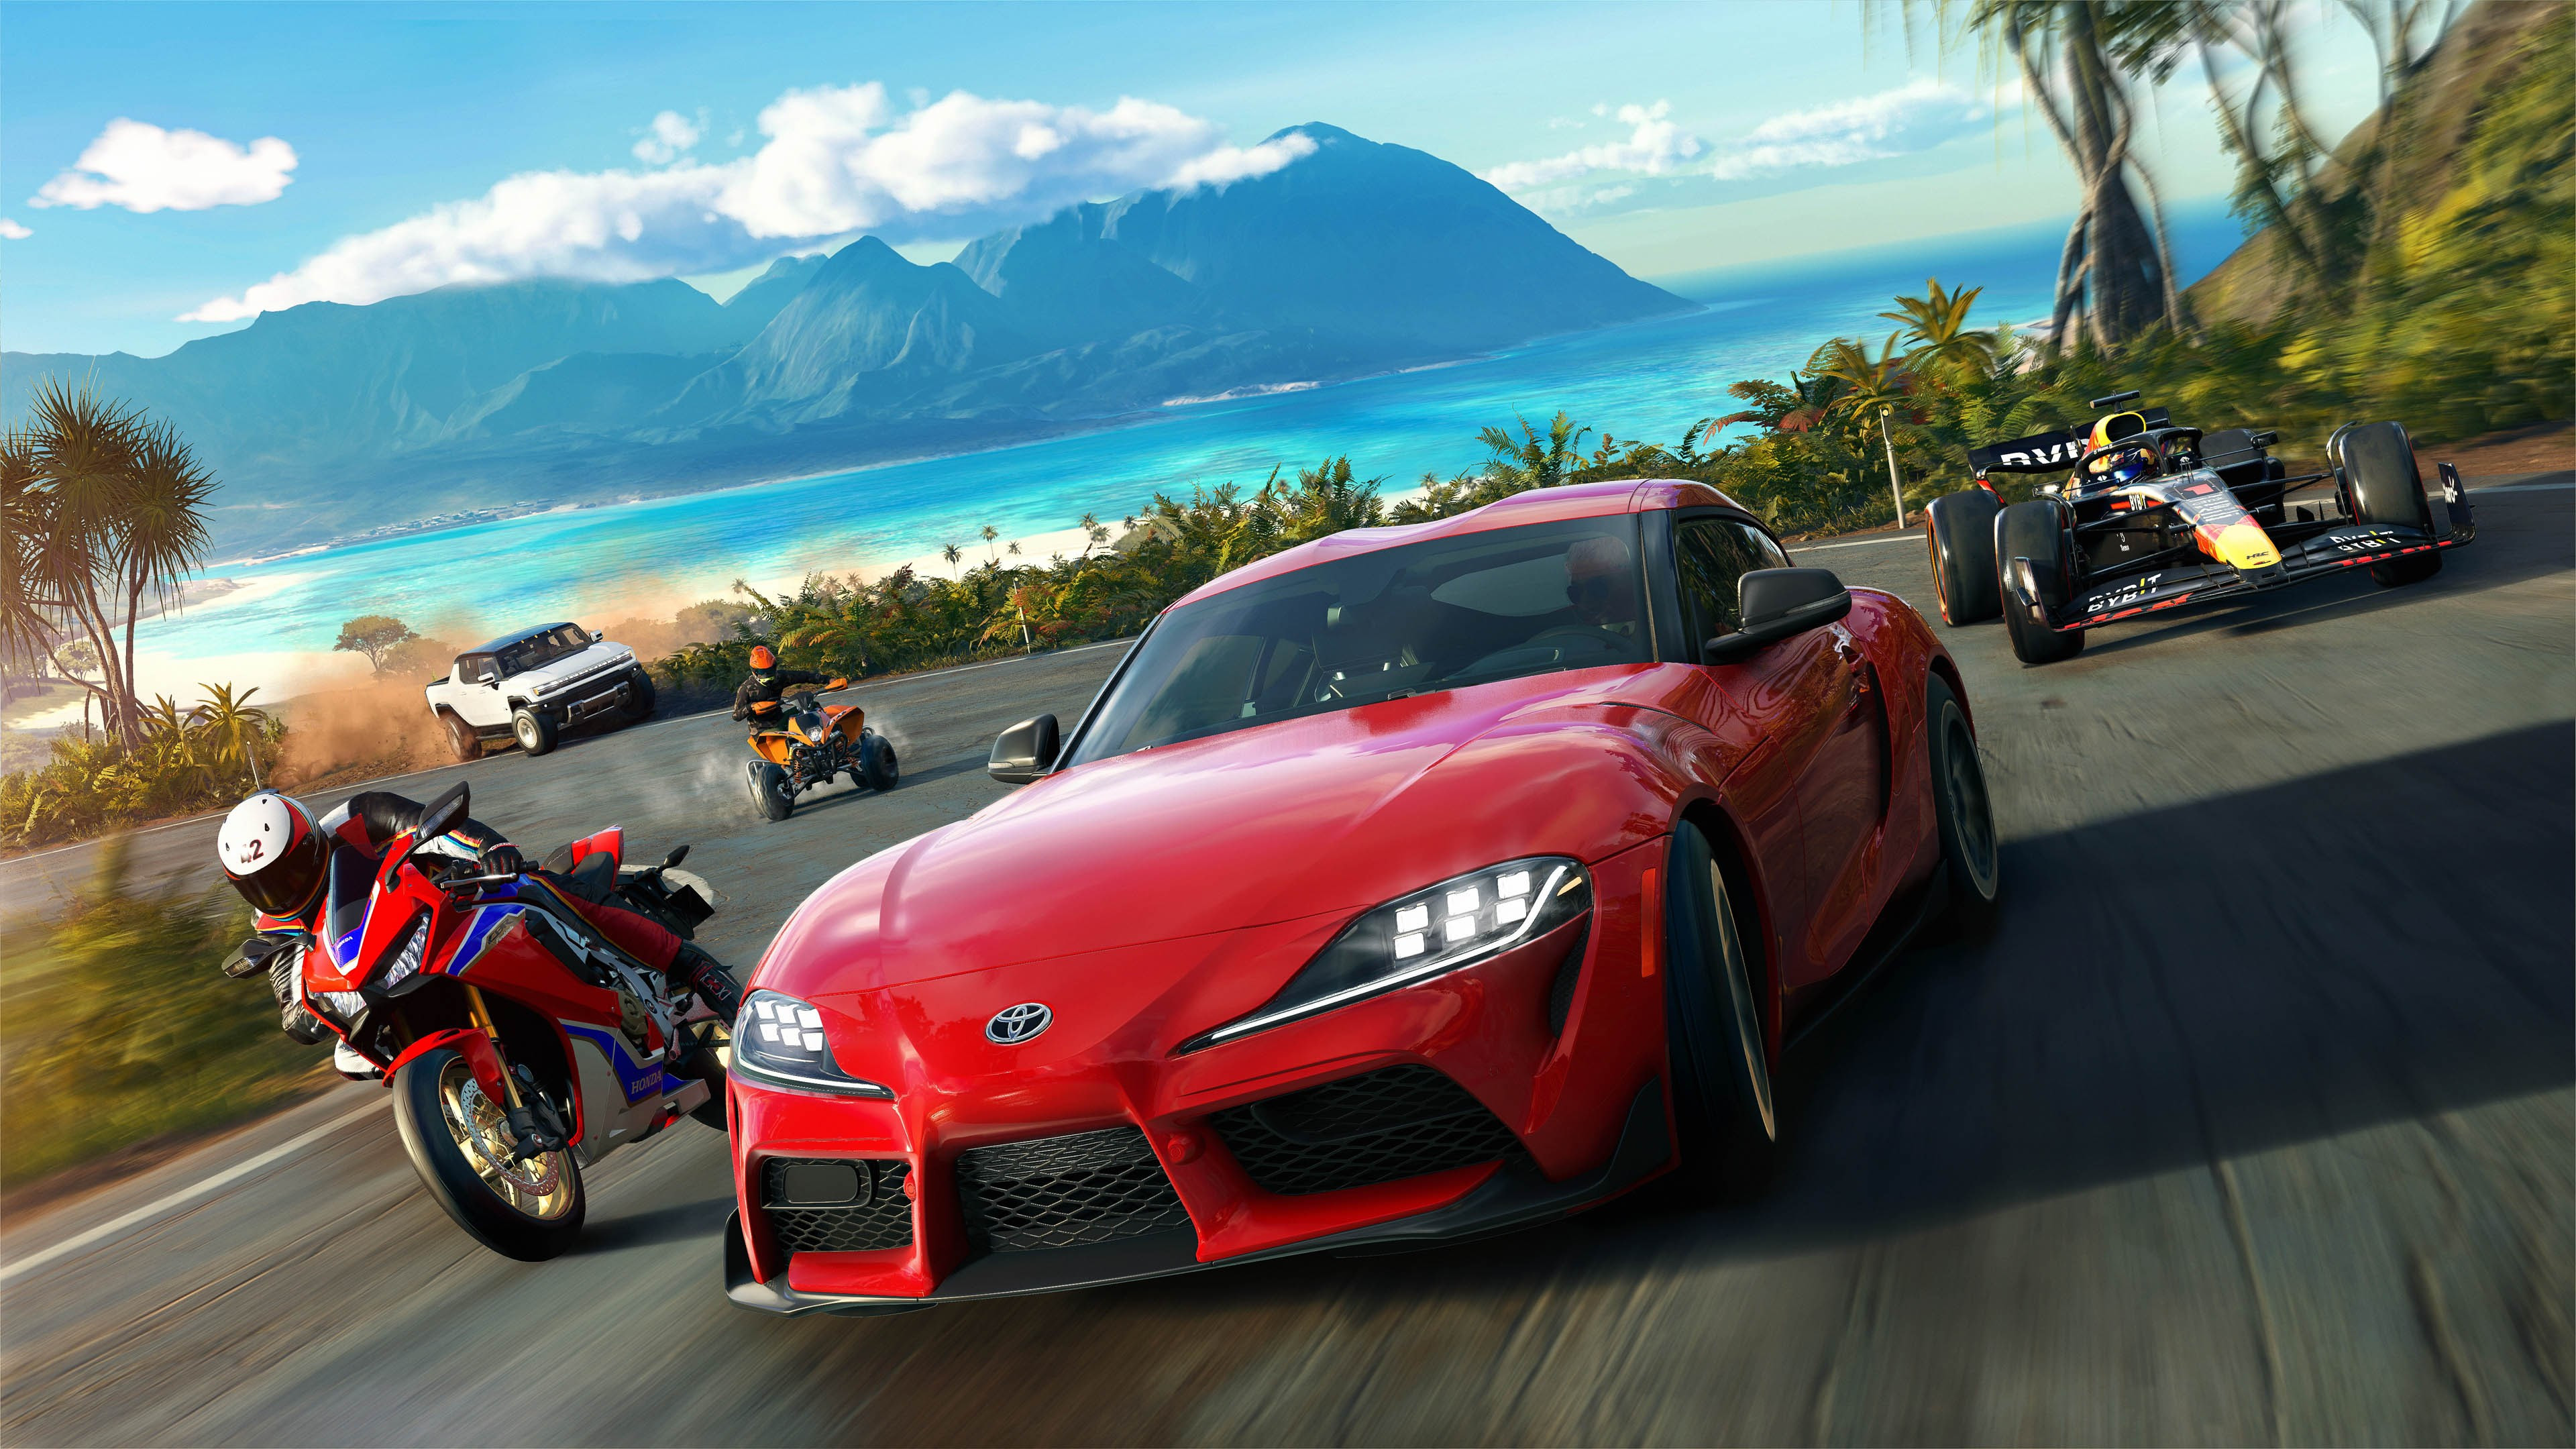 The Crew Motorfest Ultimate Edition Epic Games Account